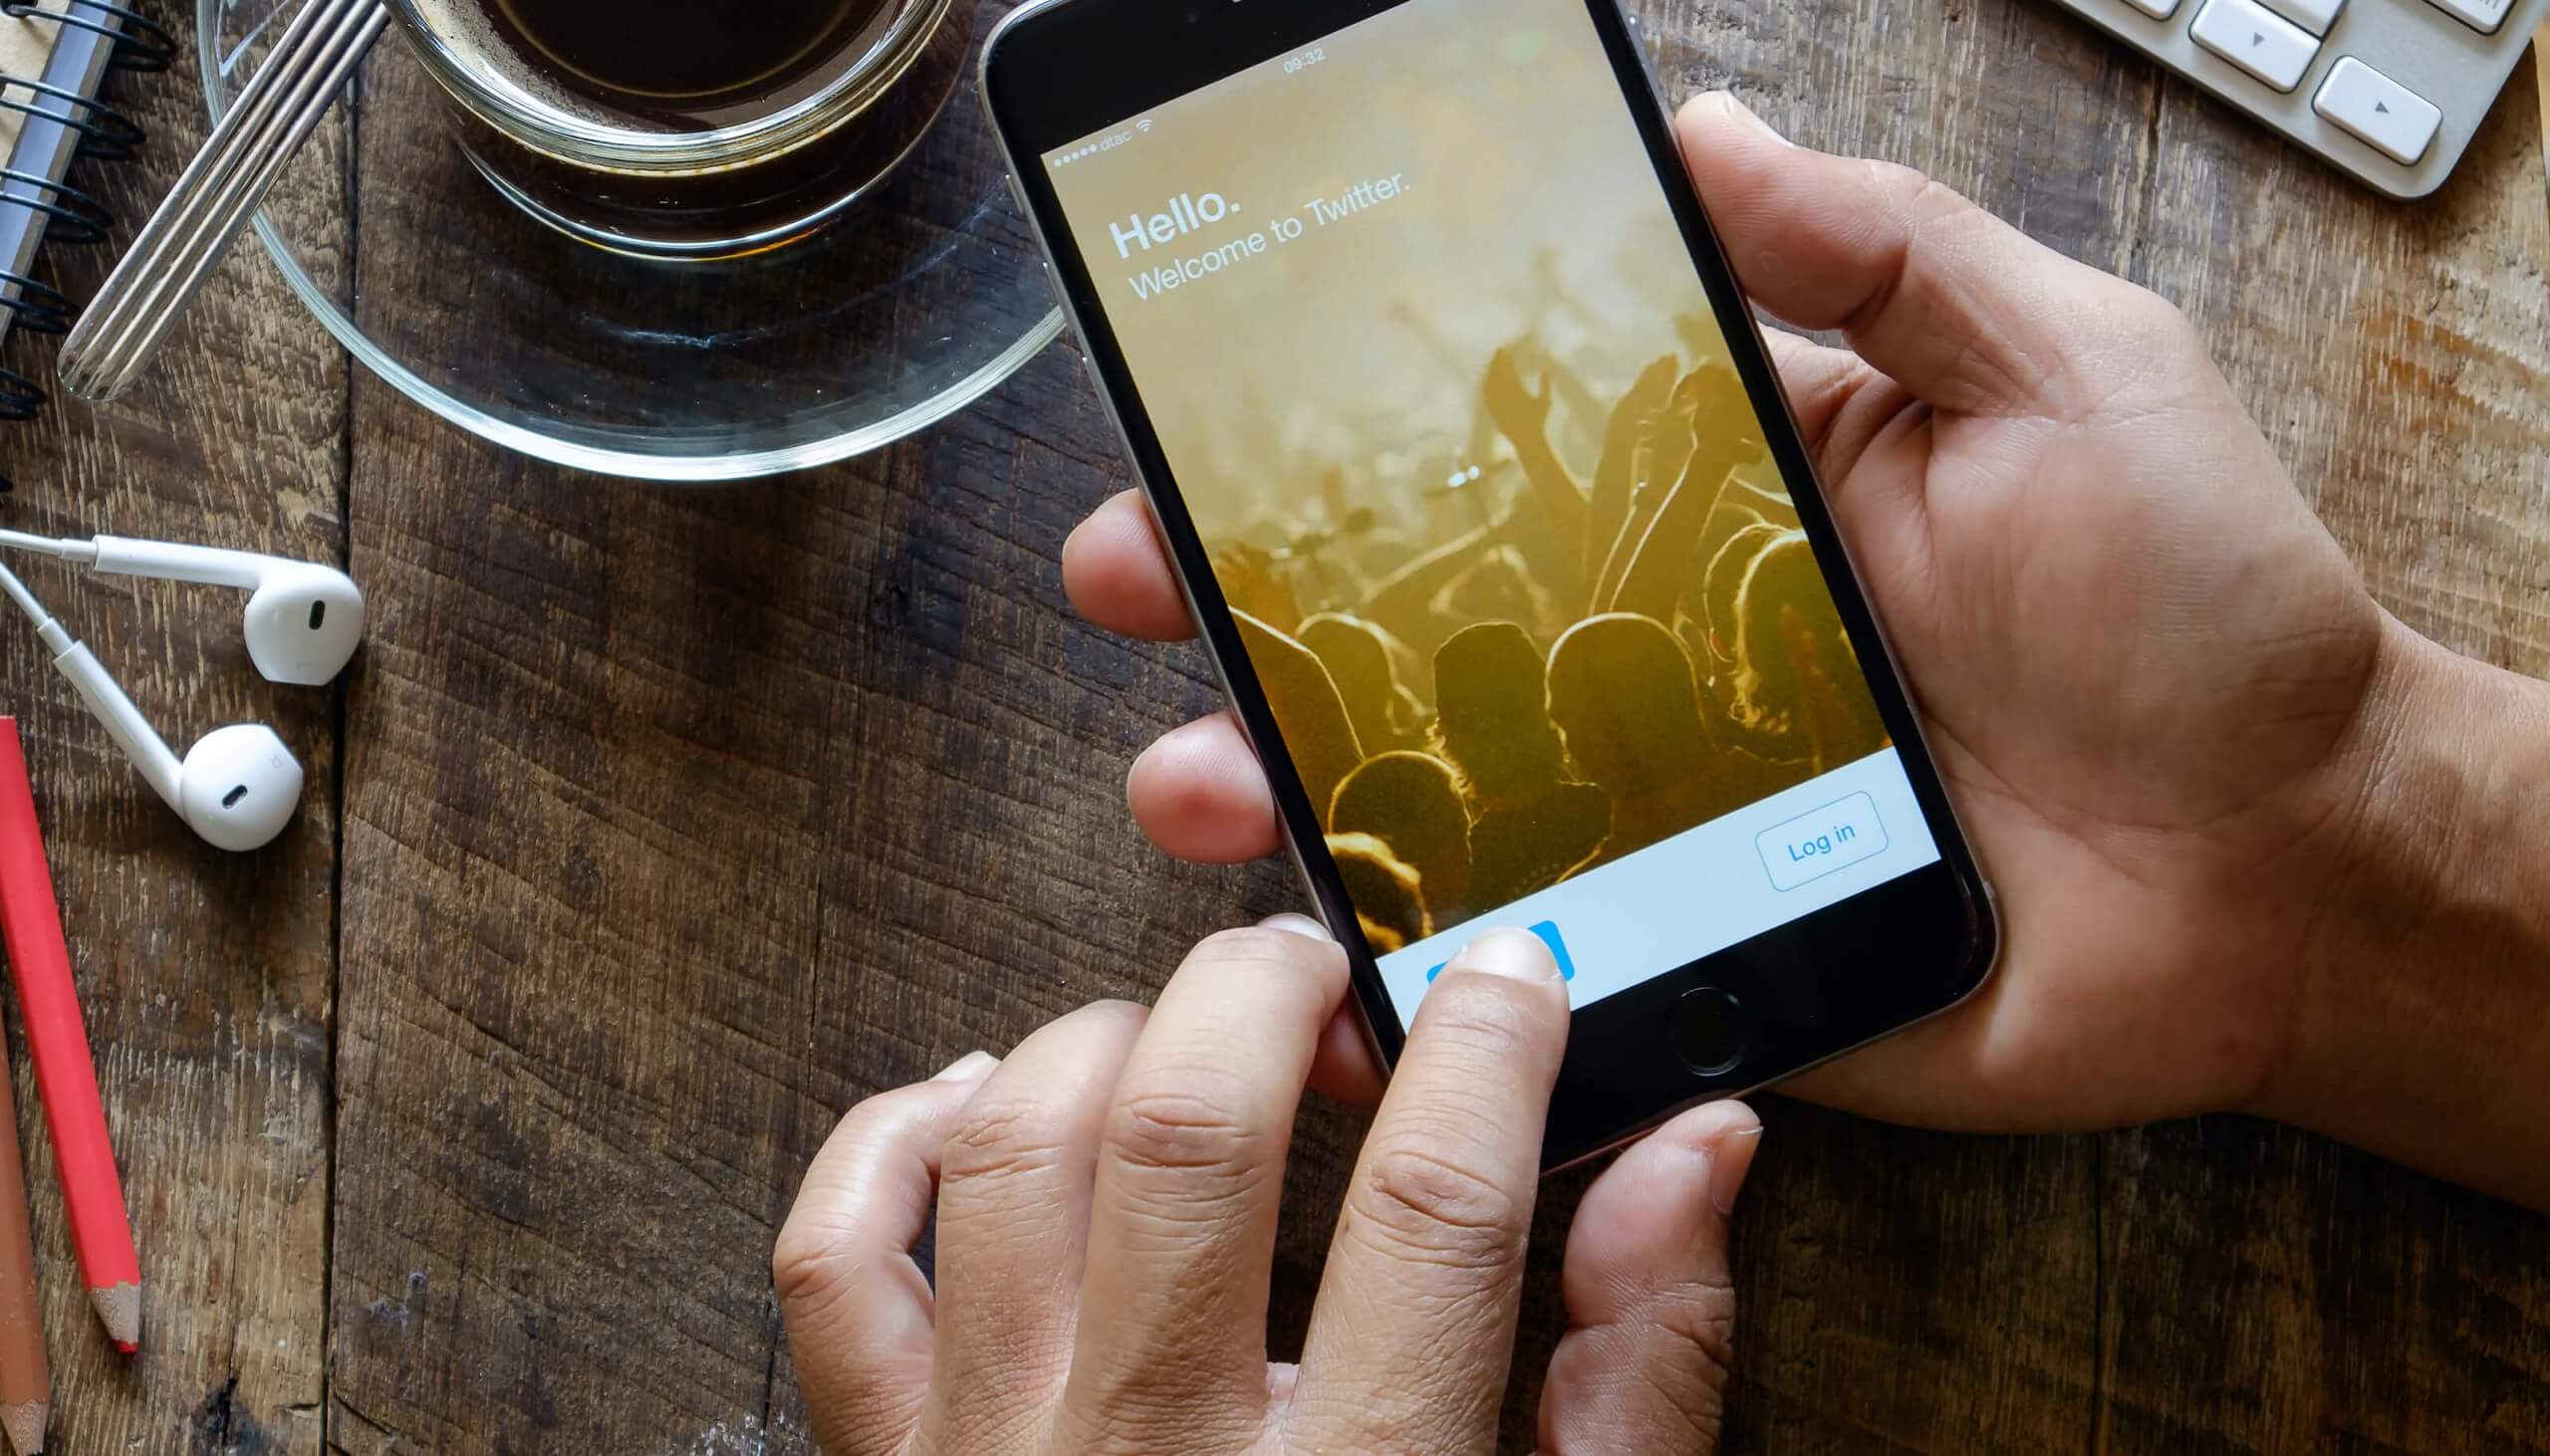 Users can now post iOS Live Photos as animated GIFs on Twitter